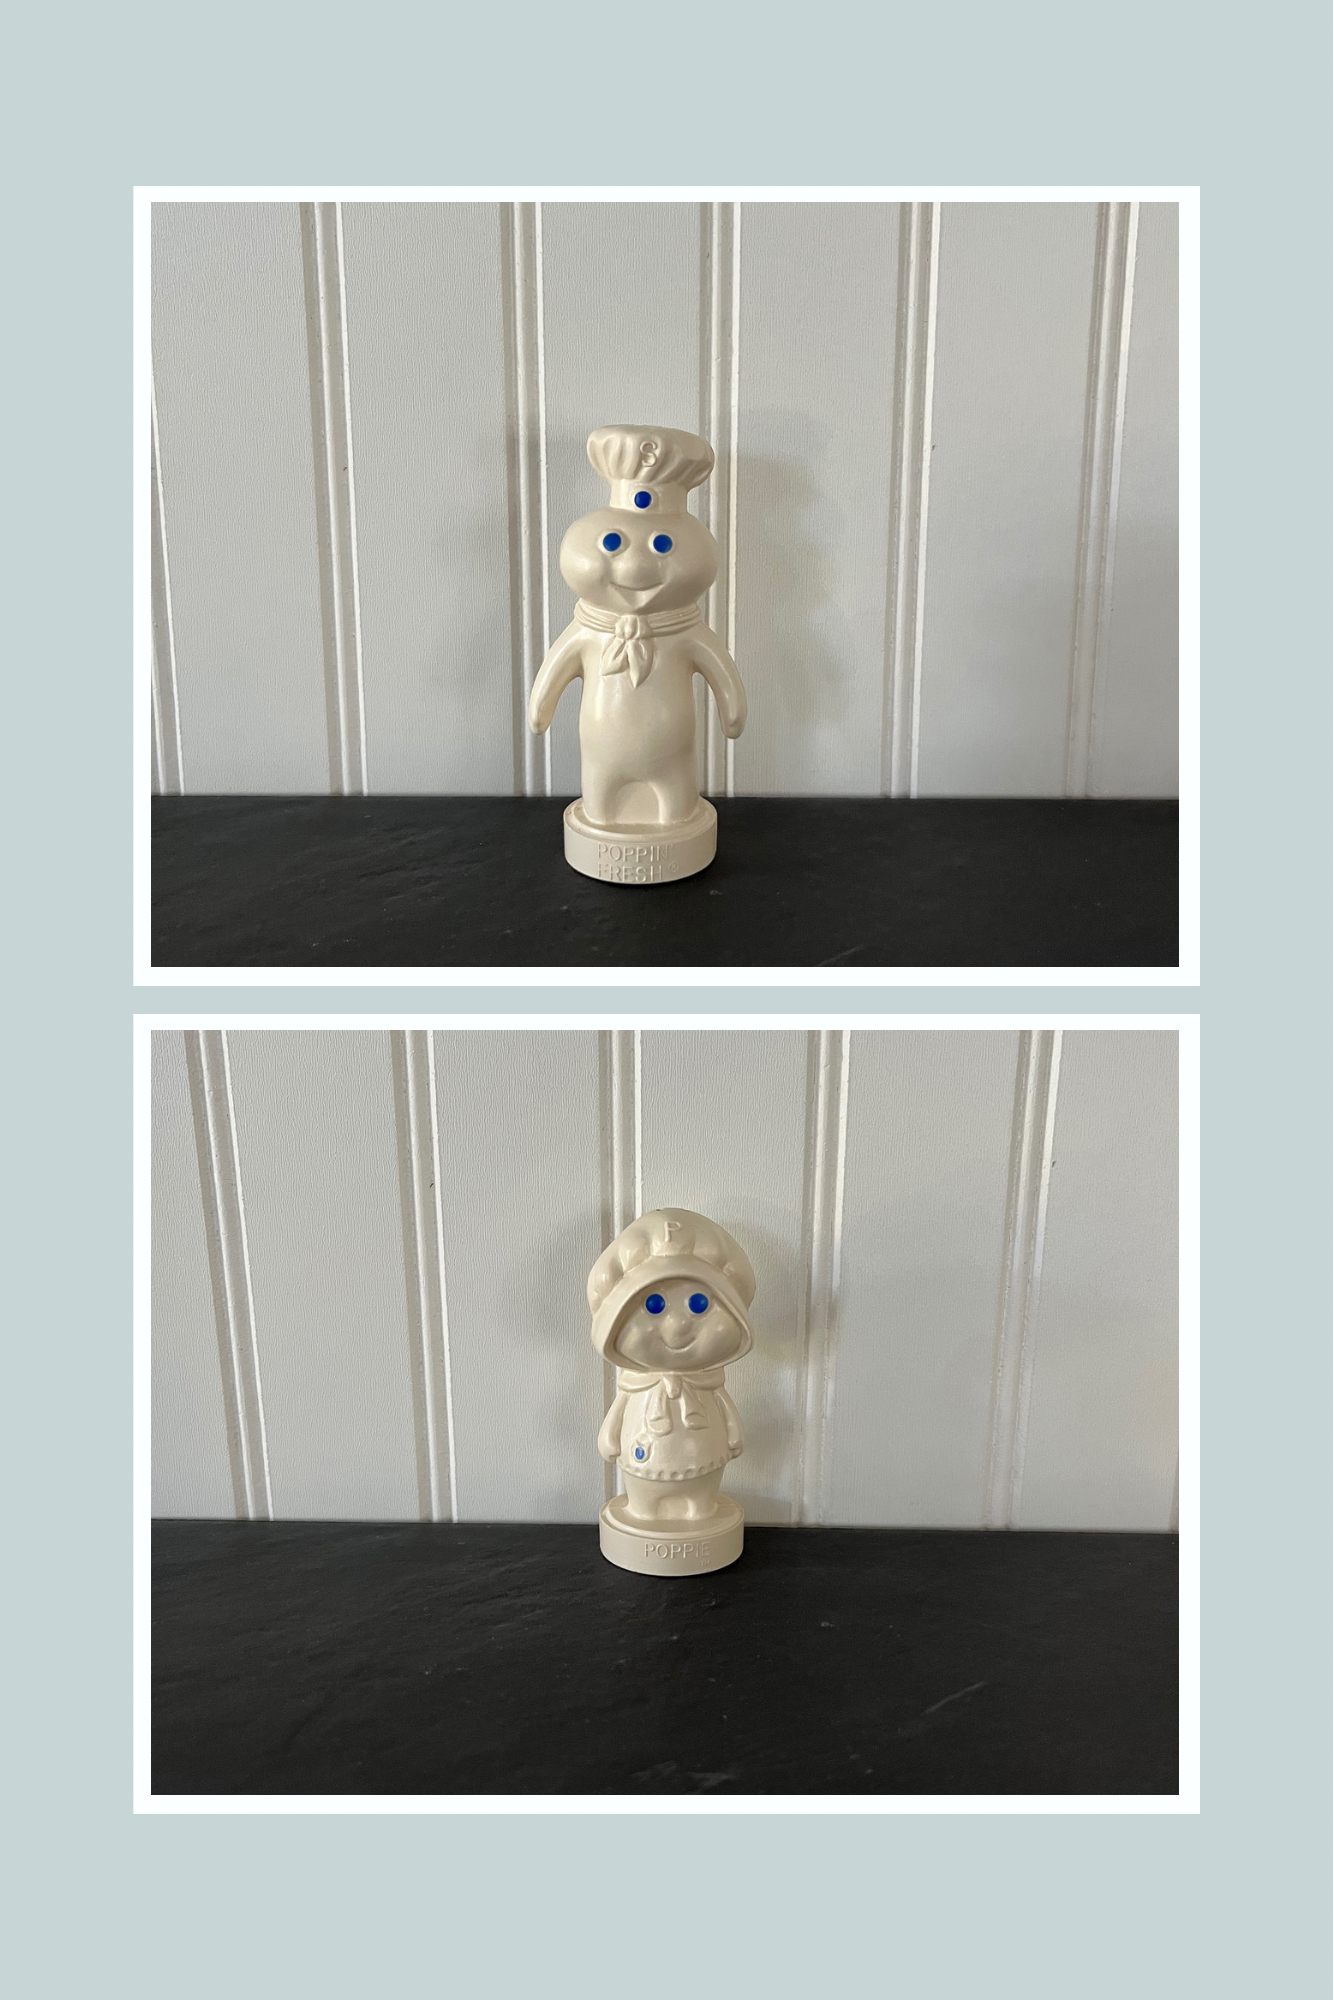 1974 Plastic Pillsbury Doughboy Salt and Pepper Shakers - Vintage Collectibles